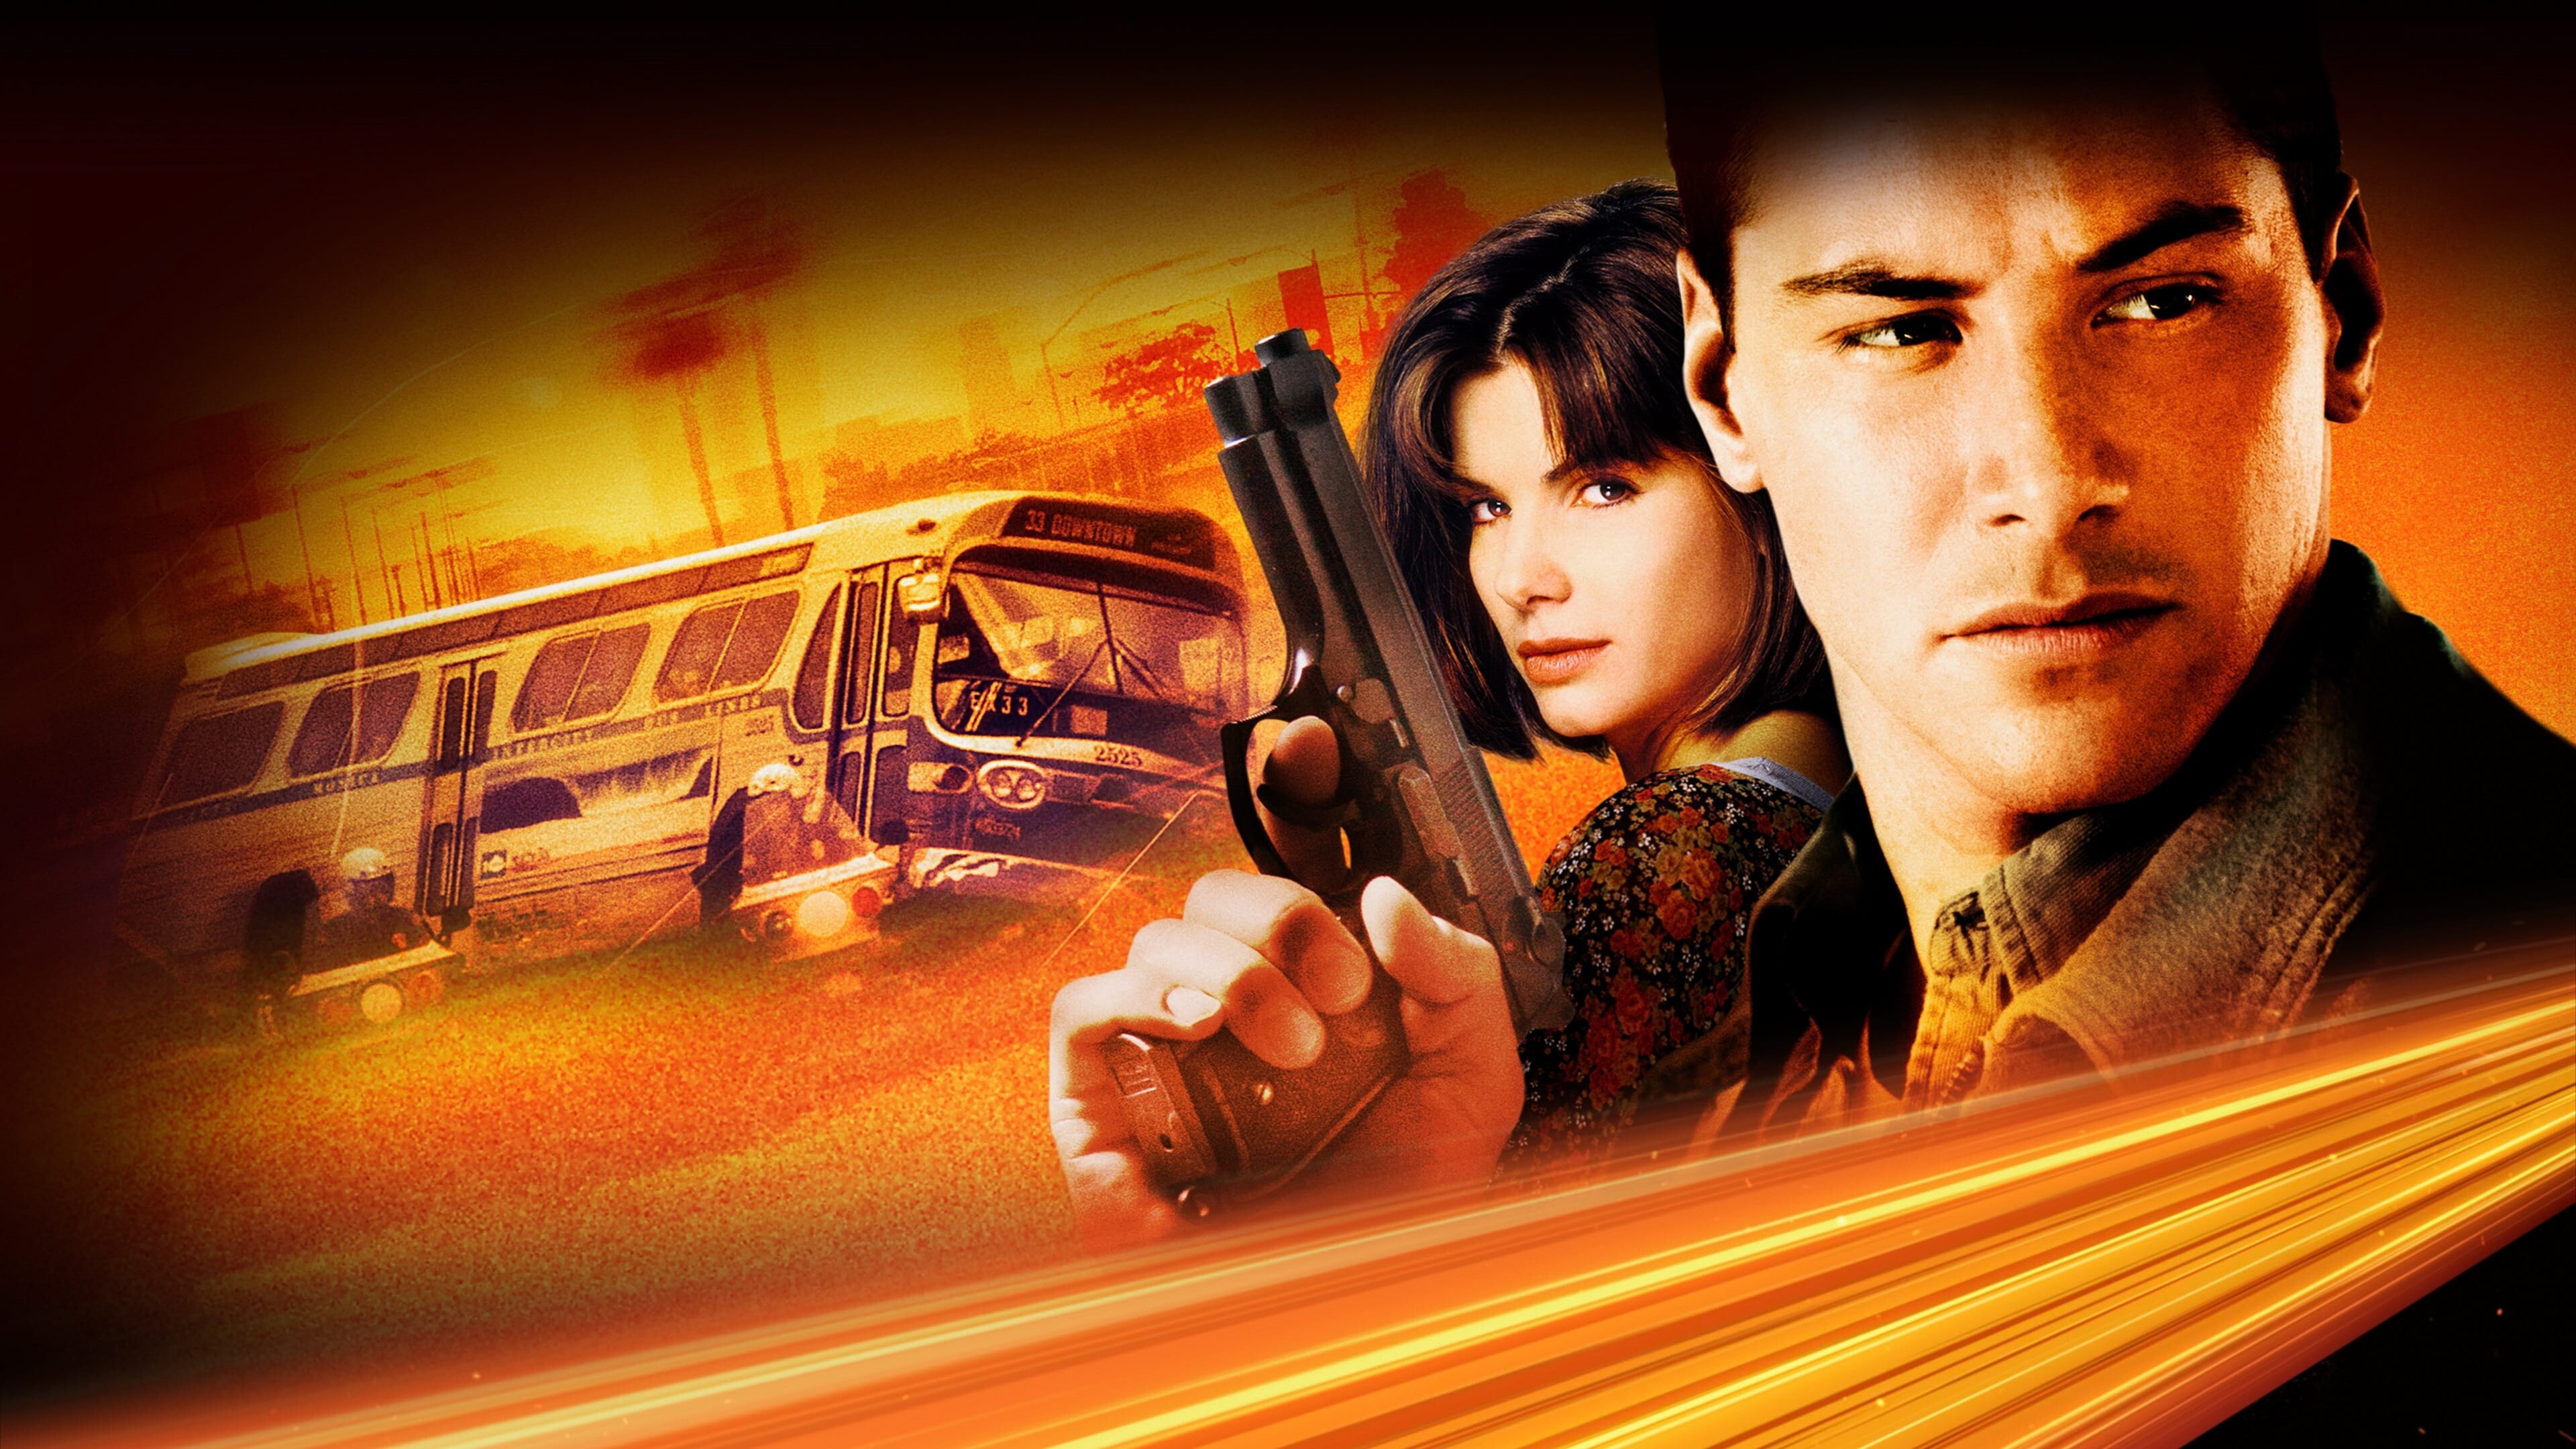 Speed (Movie 1994): Winner of the 1995 Oscars for Best Sound Effects Editing and Best Sound. 3840x2160 4K Wallpaper.